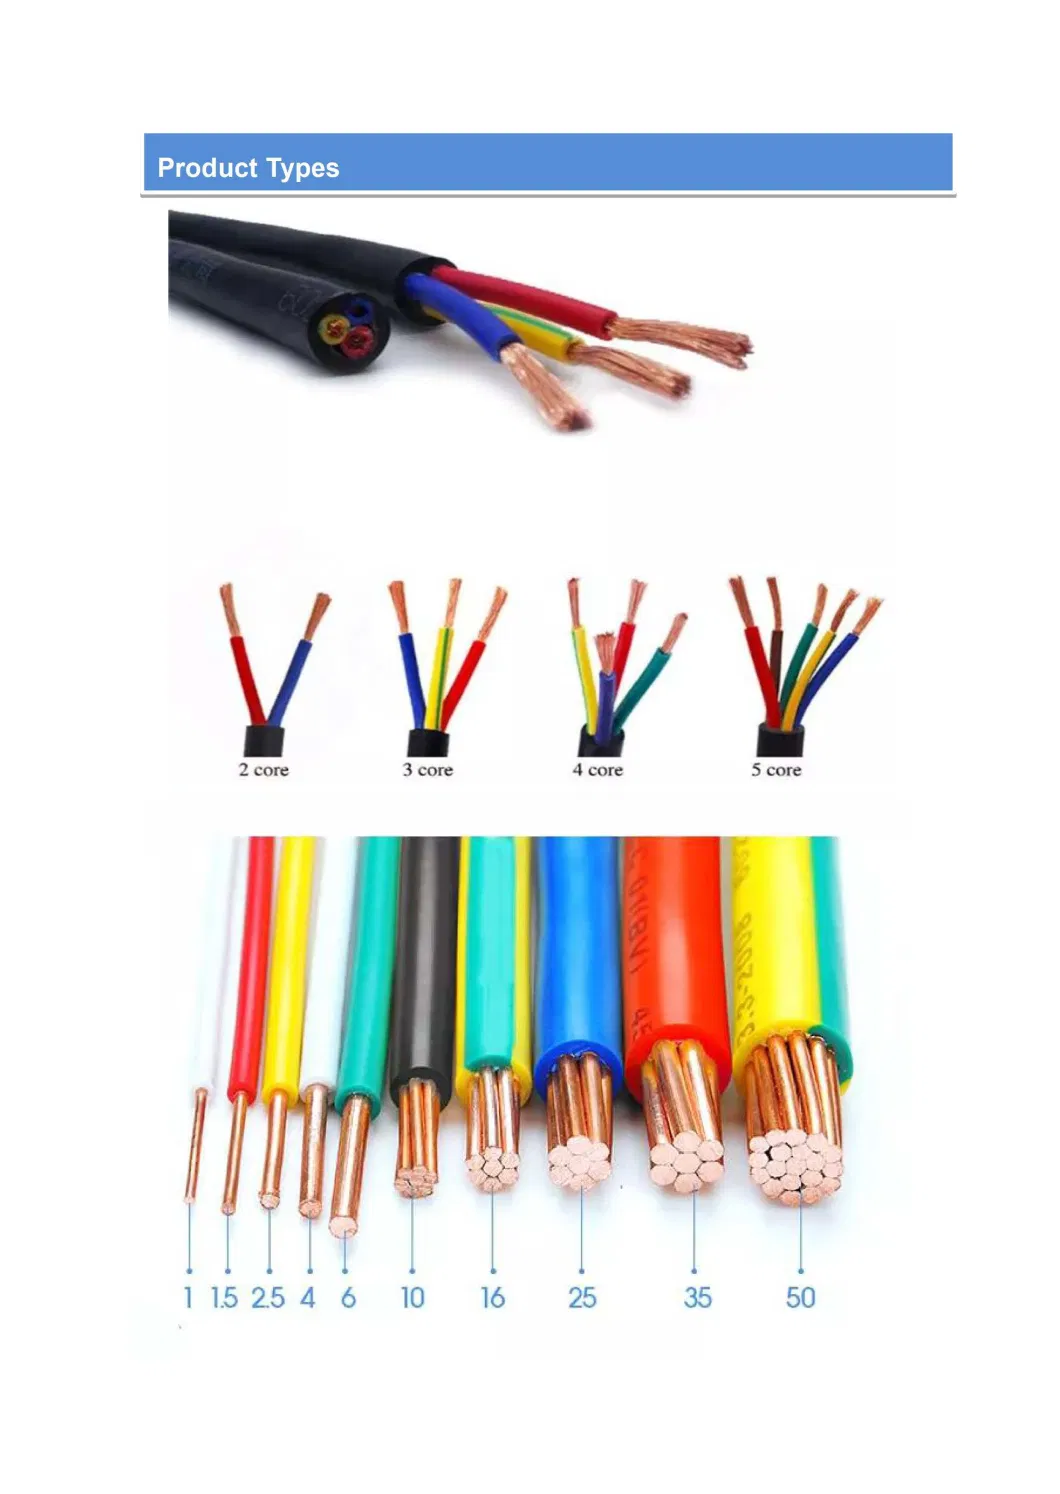 BV 10mm Electrical Wire and Cable 450/750V Copper Power 1.5mm 2.5mm 4mm 6mm Single Core Conductor PVC House Wiring Electric Wire